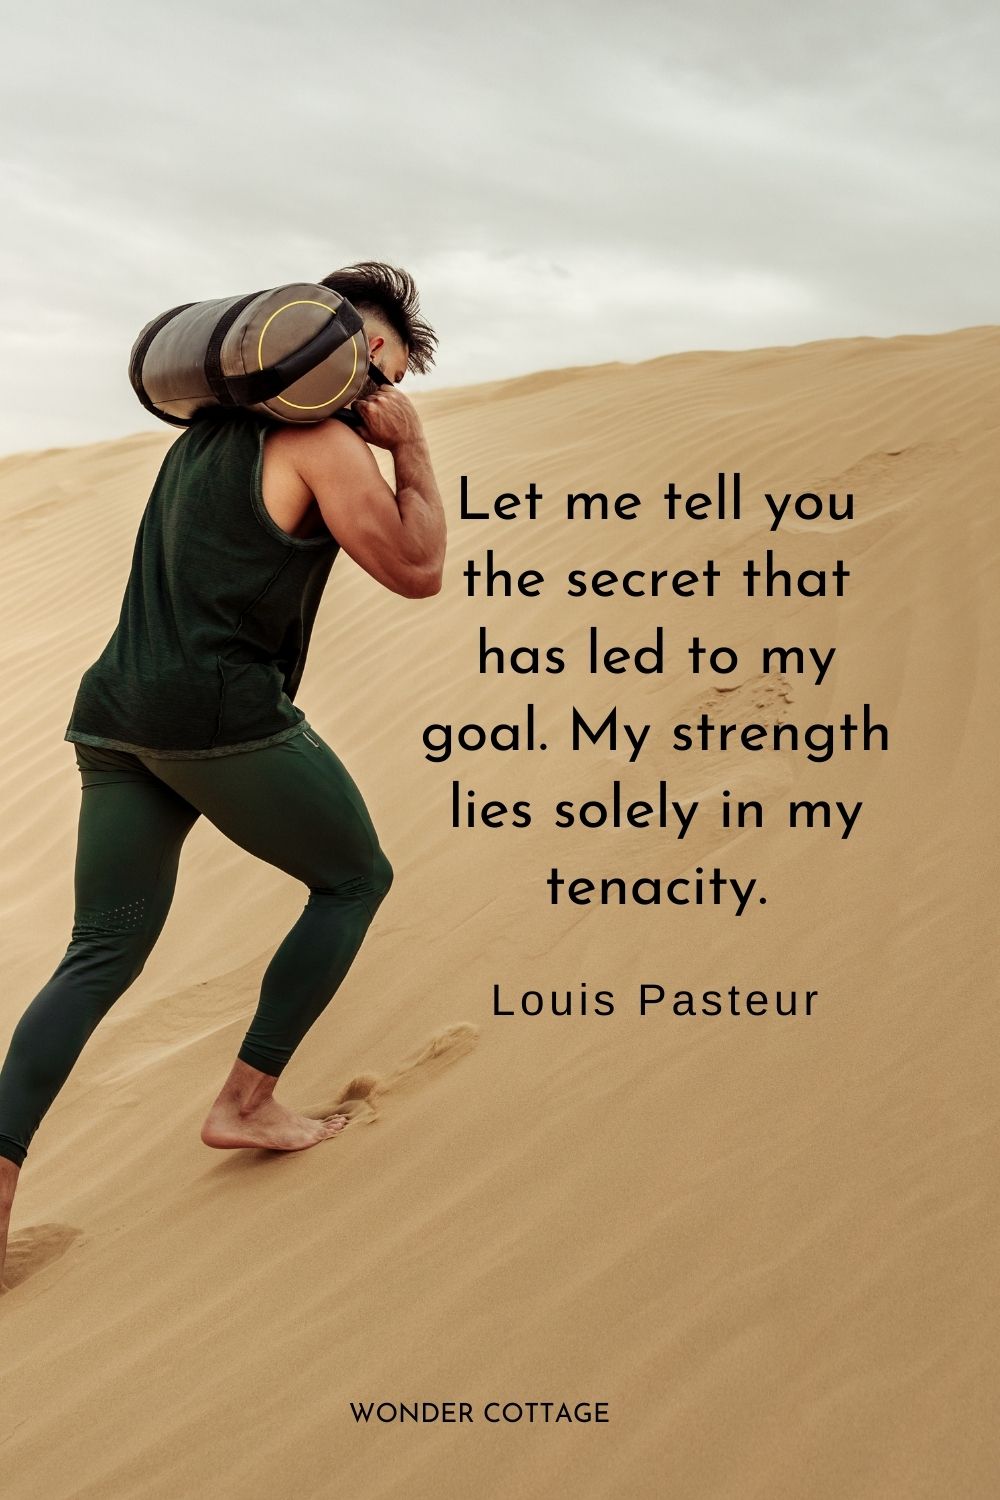 Let me tell you the secret that has led to my goal. My strength lies solely in my tenacity. Louis Pasteur 